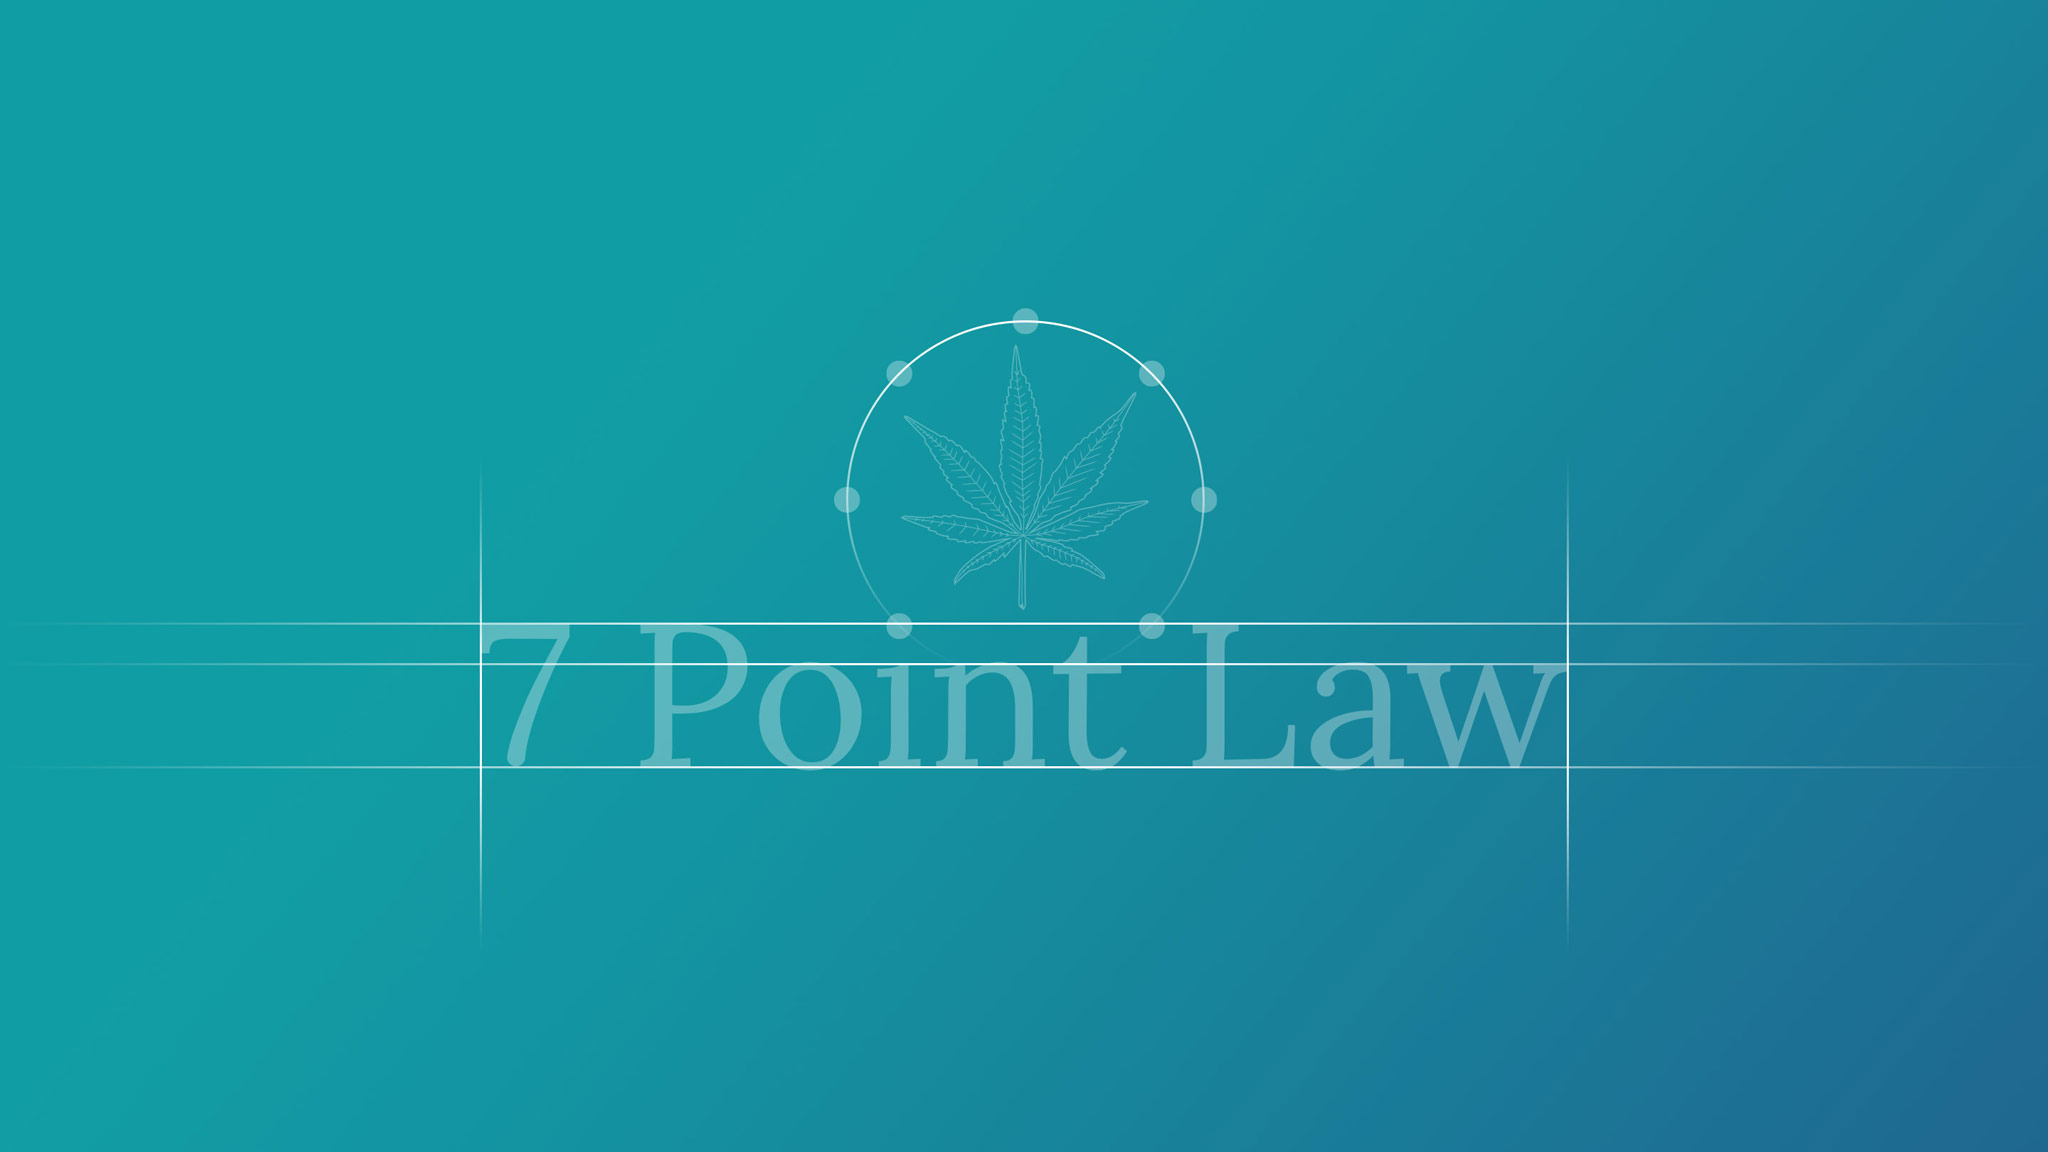 Geometry of the 7 Point Law logo design